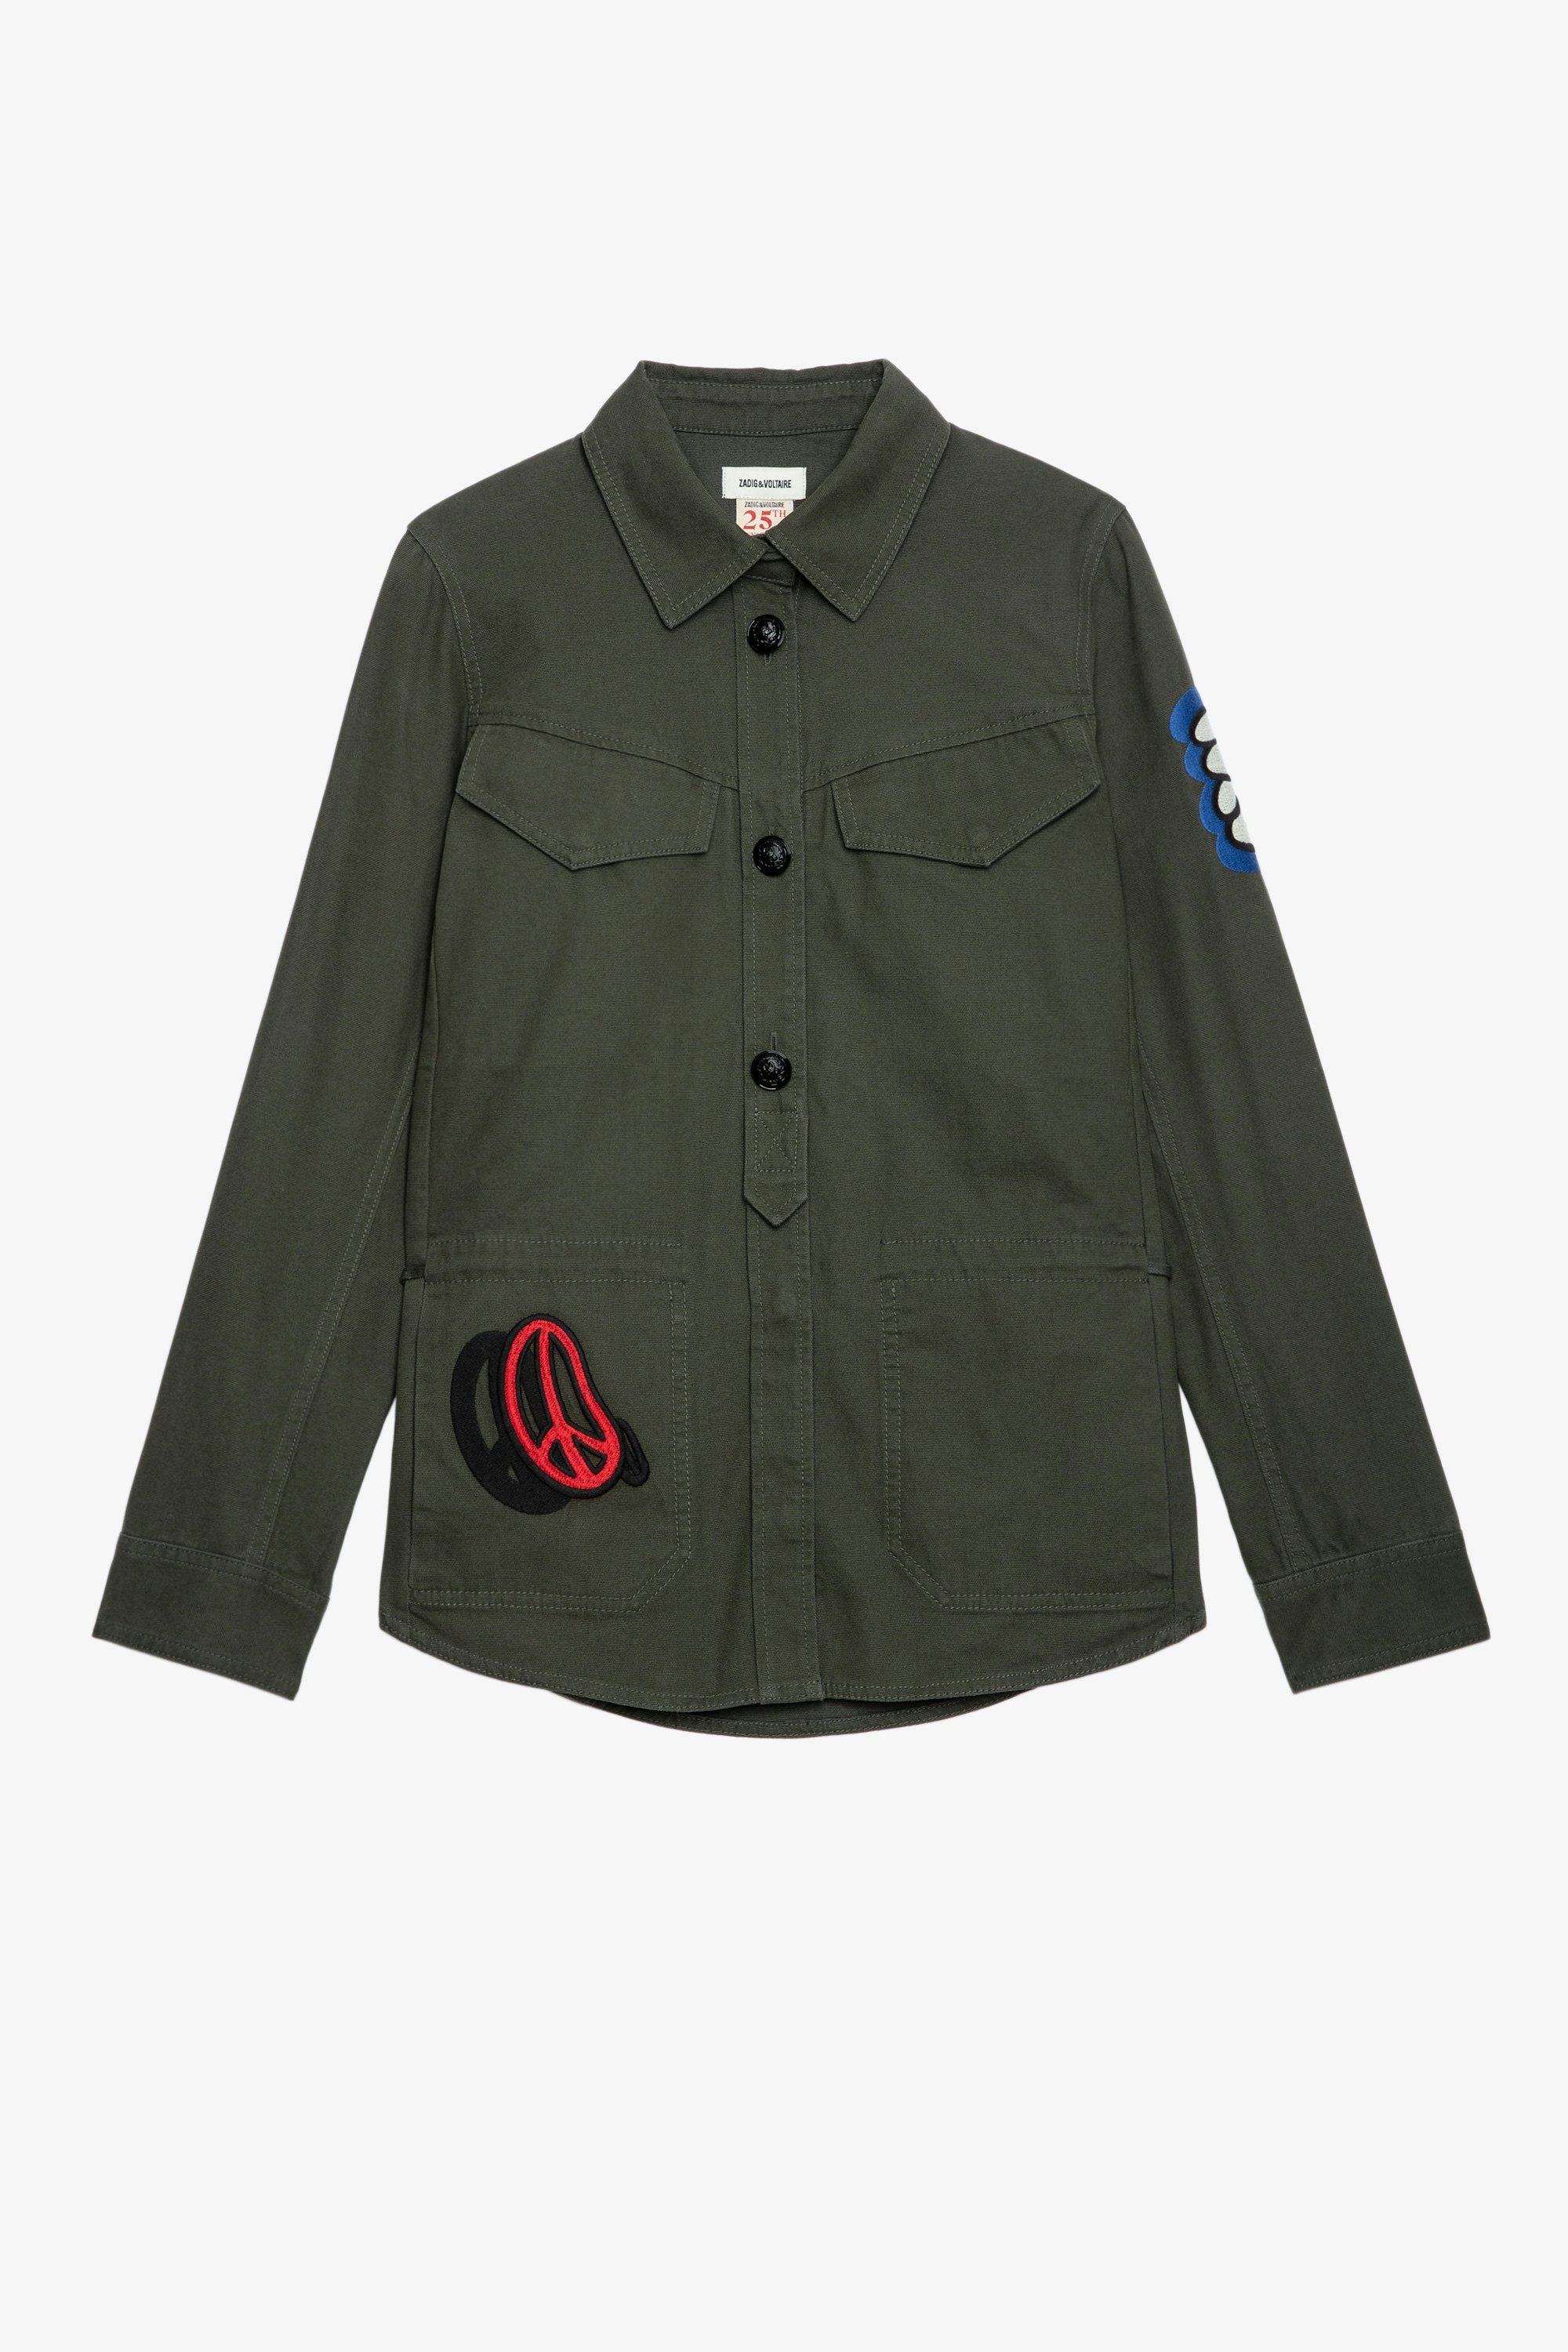 Tackl Embroidery シャツ Women's khaki cotton military shirt with iconic embroidered brand motifs 